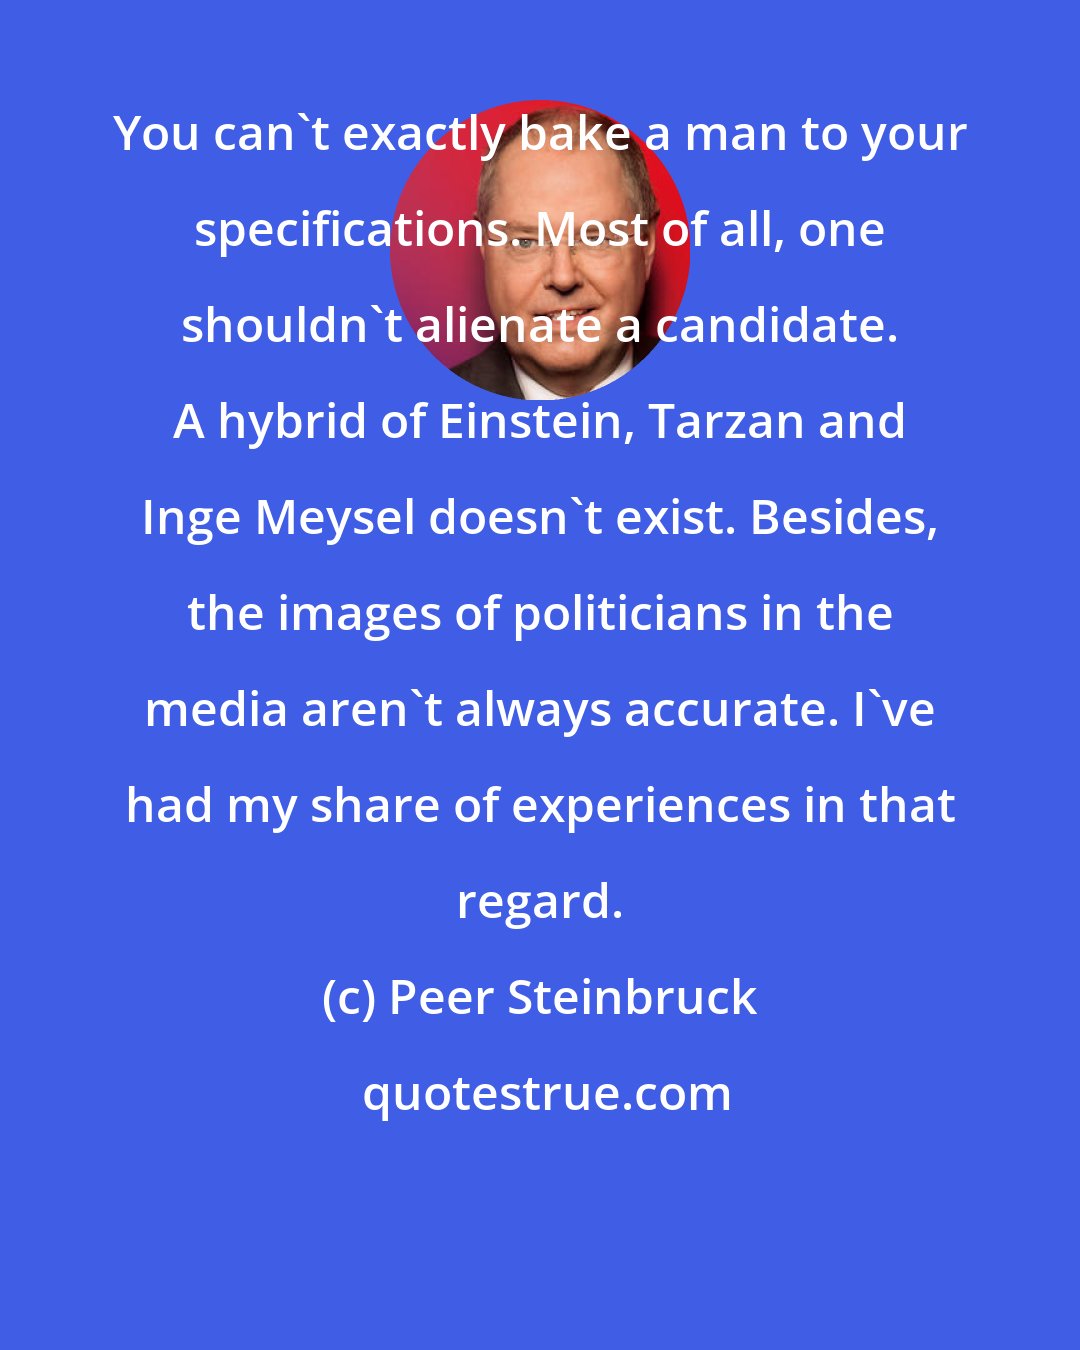 Peer Steinbruck: You can't exactly bake a man to your specifications. Most of all, one shouldn't alienate a candidate. A hybrid of Einstein, Tarzan and Inge Meysel doesn't exist. Besides, the images of politicians in the media aren't always accurate. I've had my share of experiences in that regard.